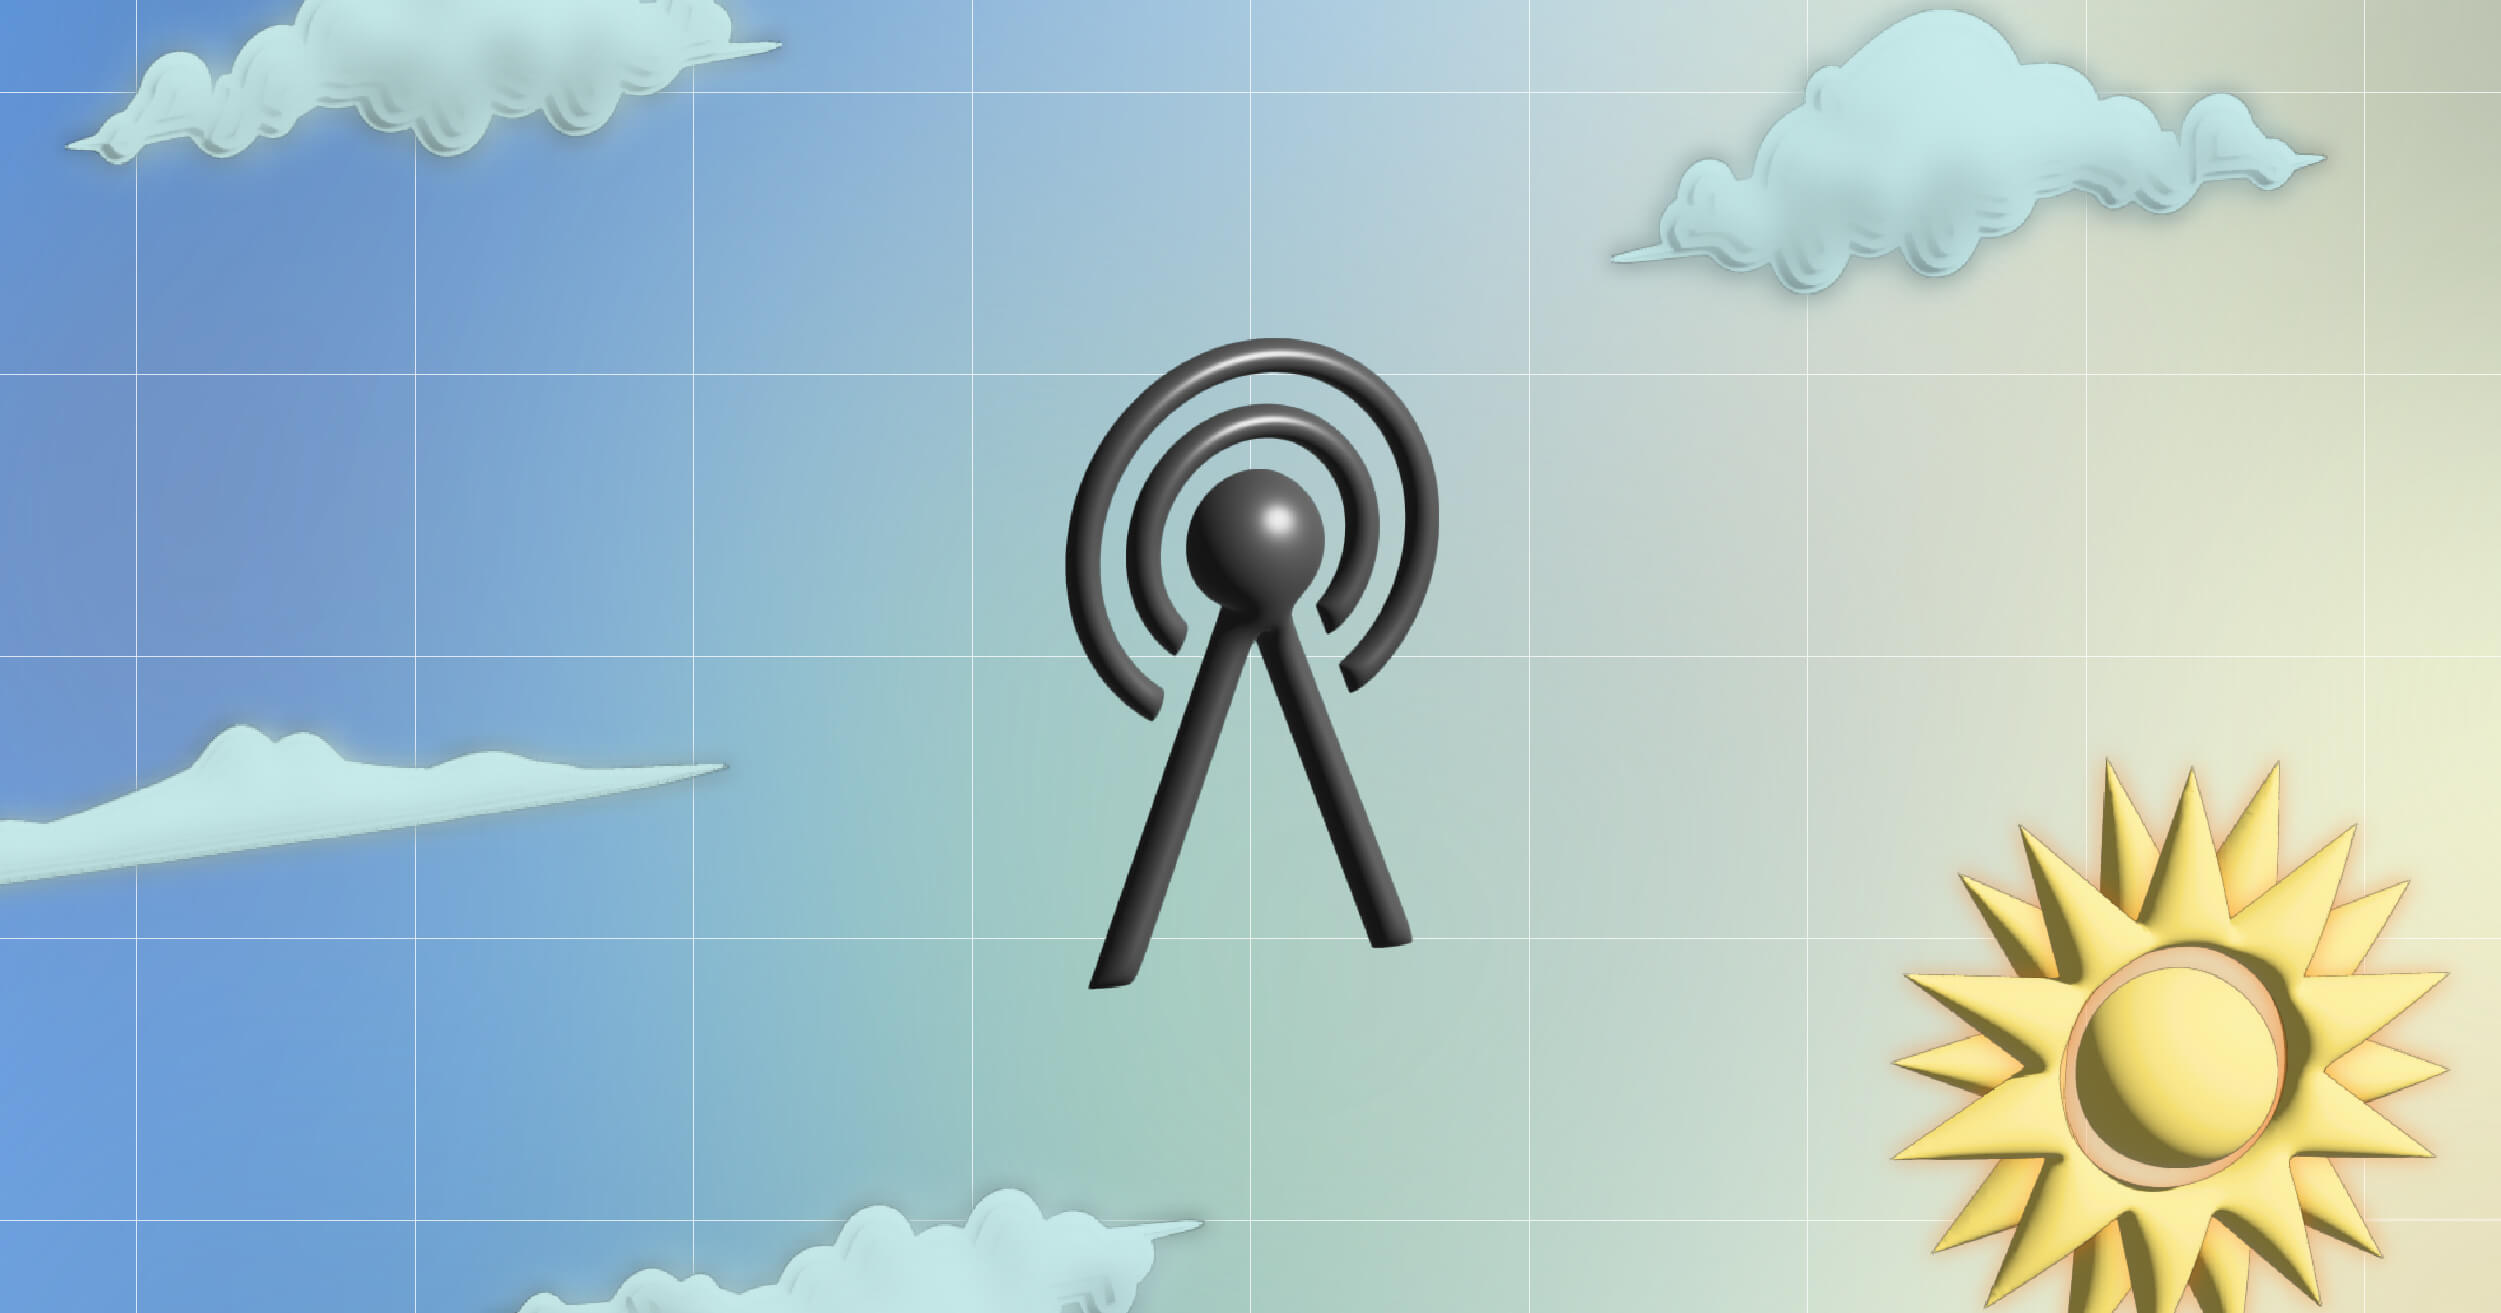 6 icons in front of a blue background with a white grid. The Middle is a station icon, the bottom right is a sun icon and the rest are variations of cloud icons.